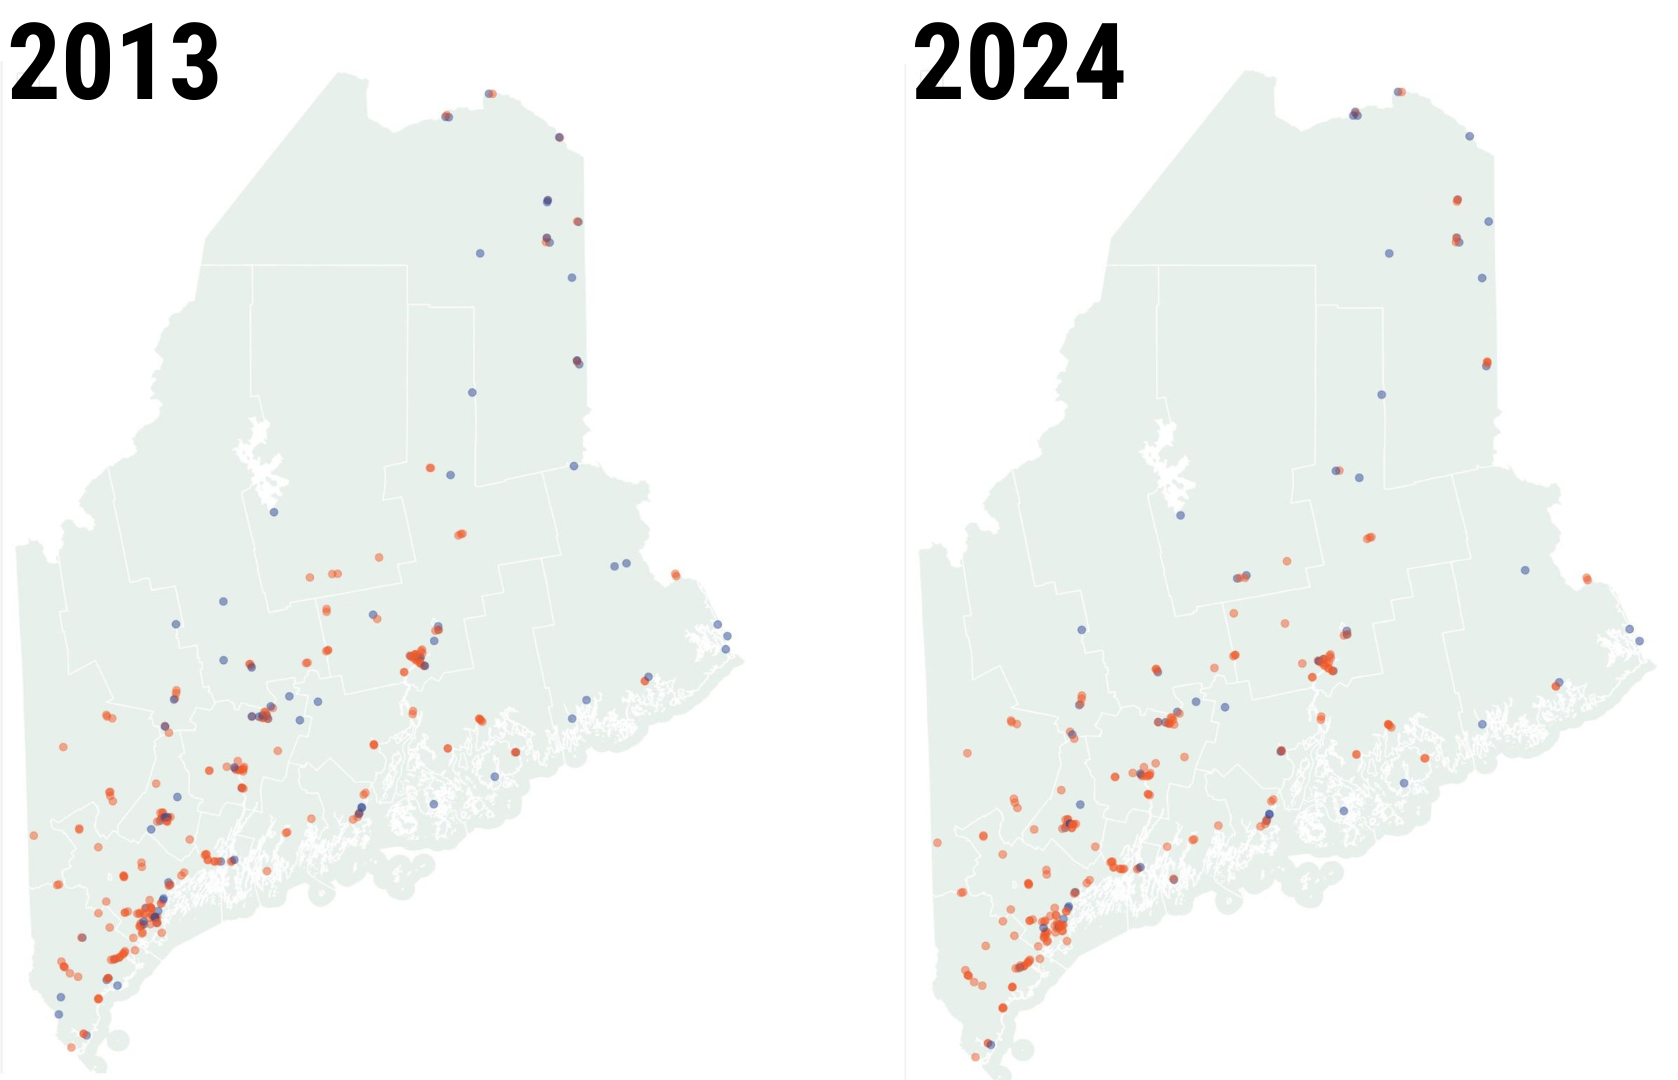 Two maps of Maine pharmacy locations, side by side. On the left are the locations of pharmacies in Maine in 2013. The locations in 2024 are on the right. 